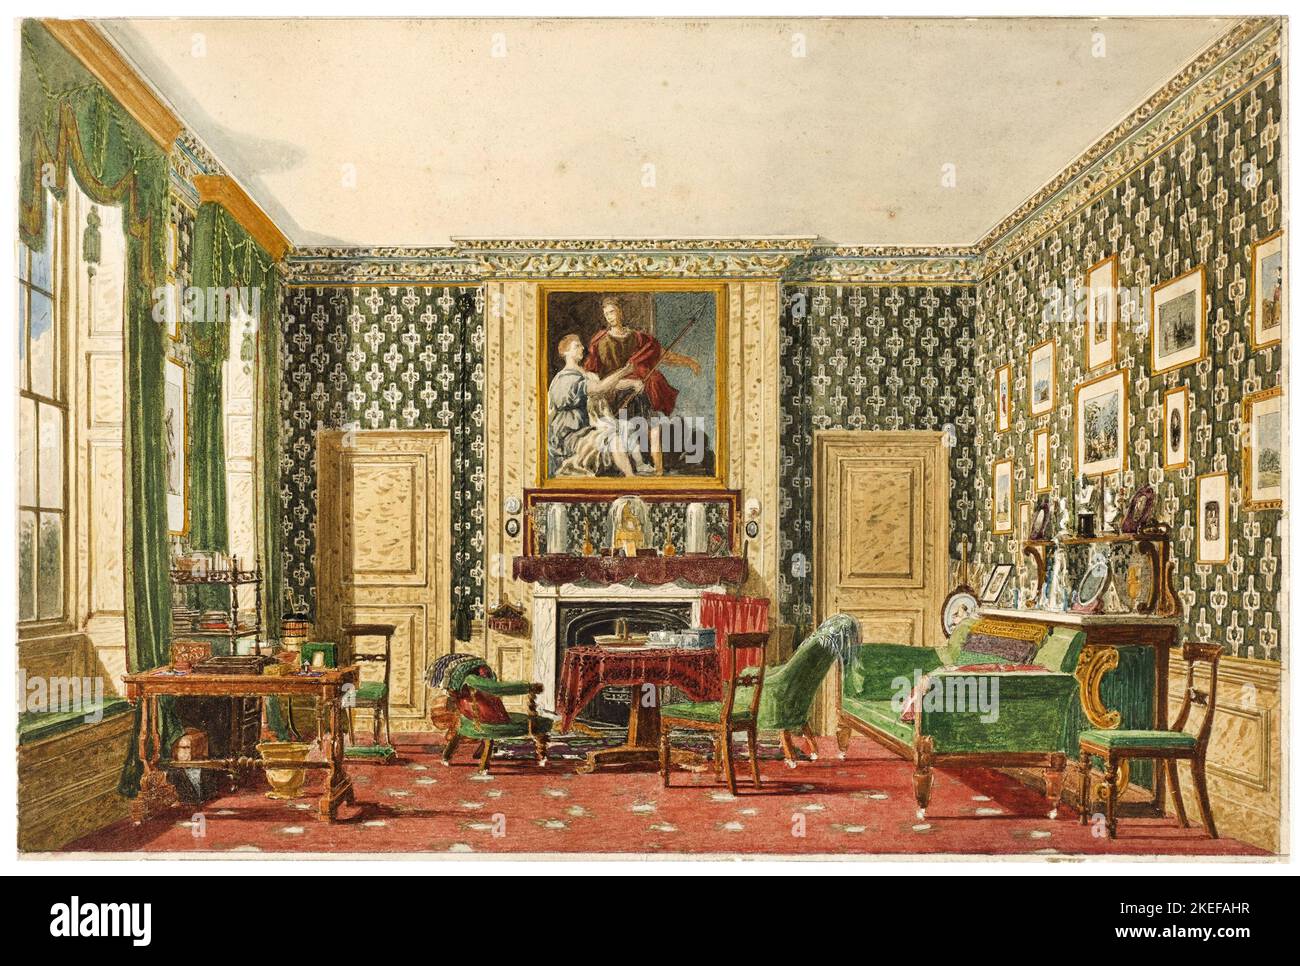 Mary Ellen Best, An Interior, Circa 1837-1840,  Brush and watercolor, graphite on off-white wove paper, Cooper Hewitt, Smithsonian Design Museum, USA. Stock Photo